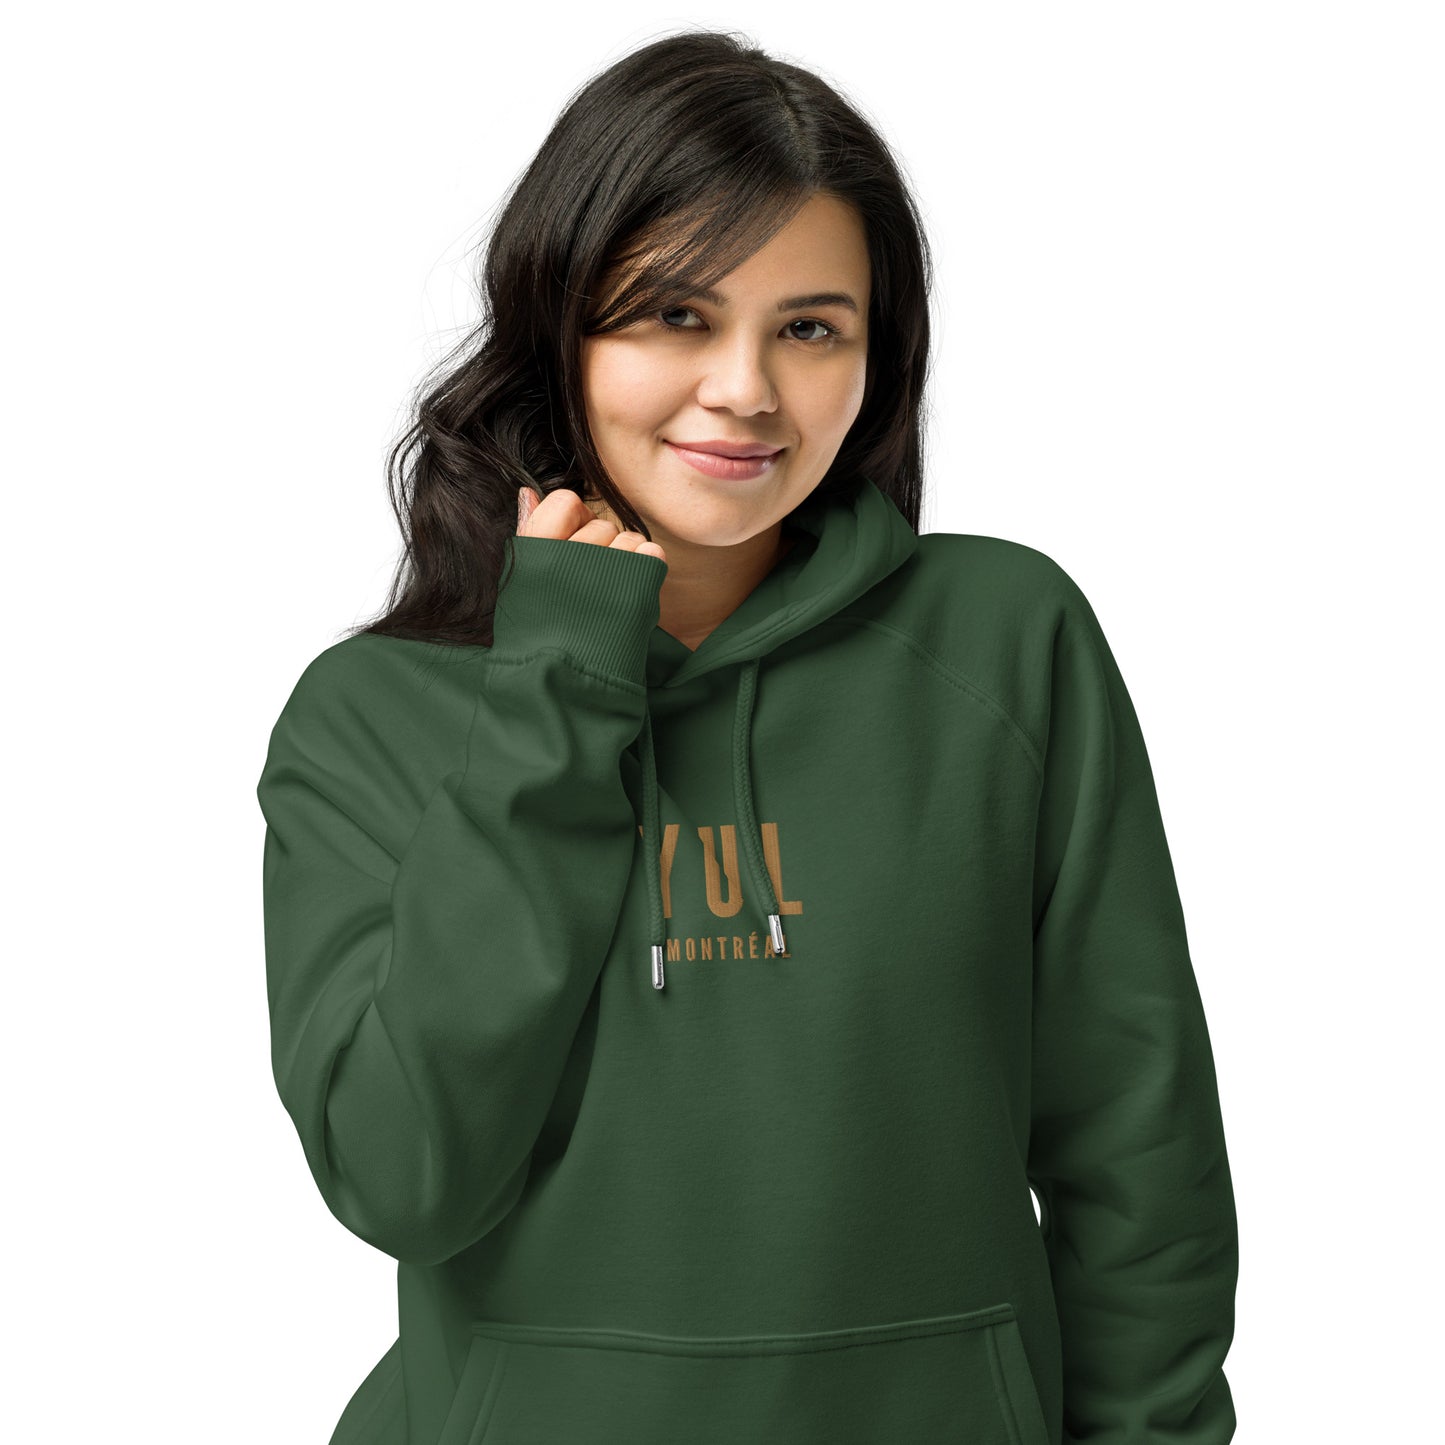 City Organic Hoodie - Old Gold • YUL Montreal • YHM Designs - Image 03